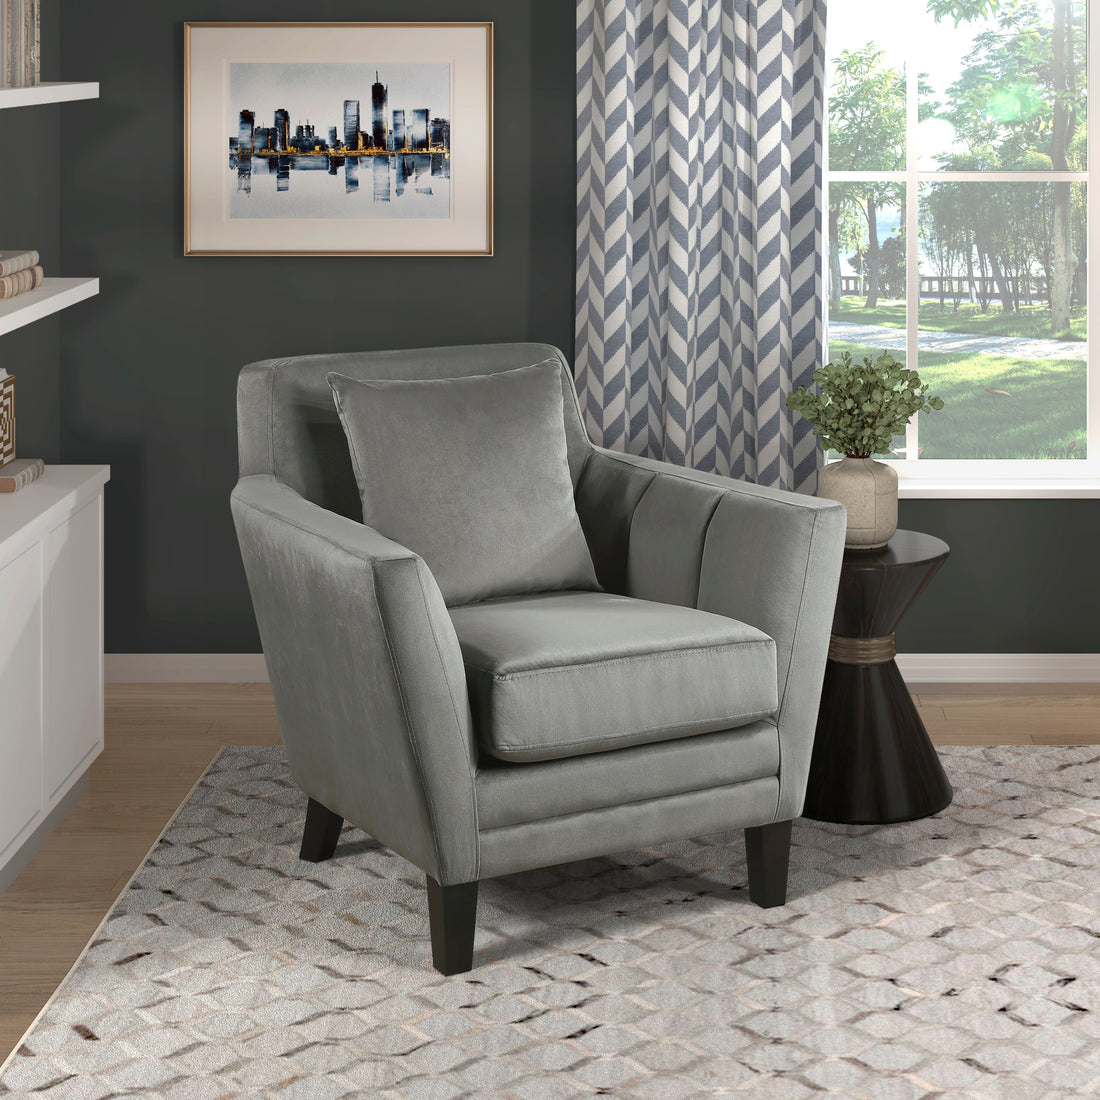 Stylish Home Accent Chair Gray Velvet Upholstery gray-primary living space-modern-solid wood